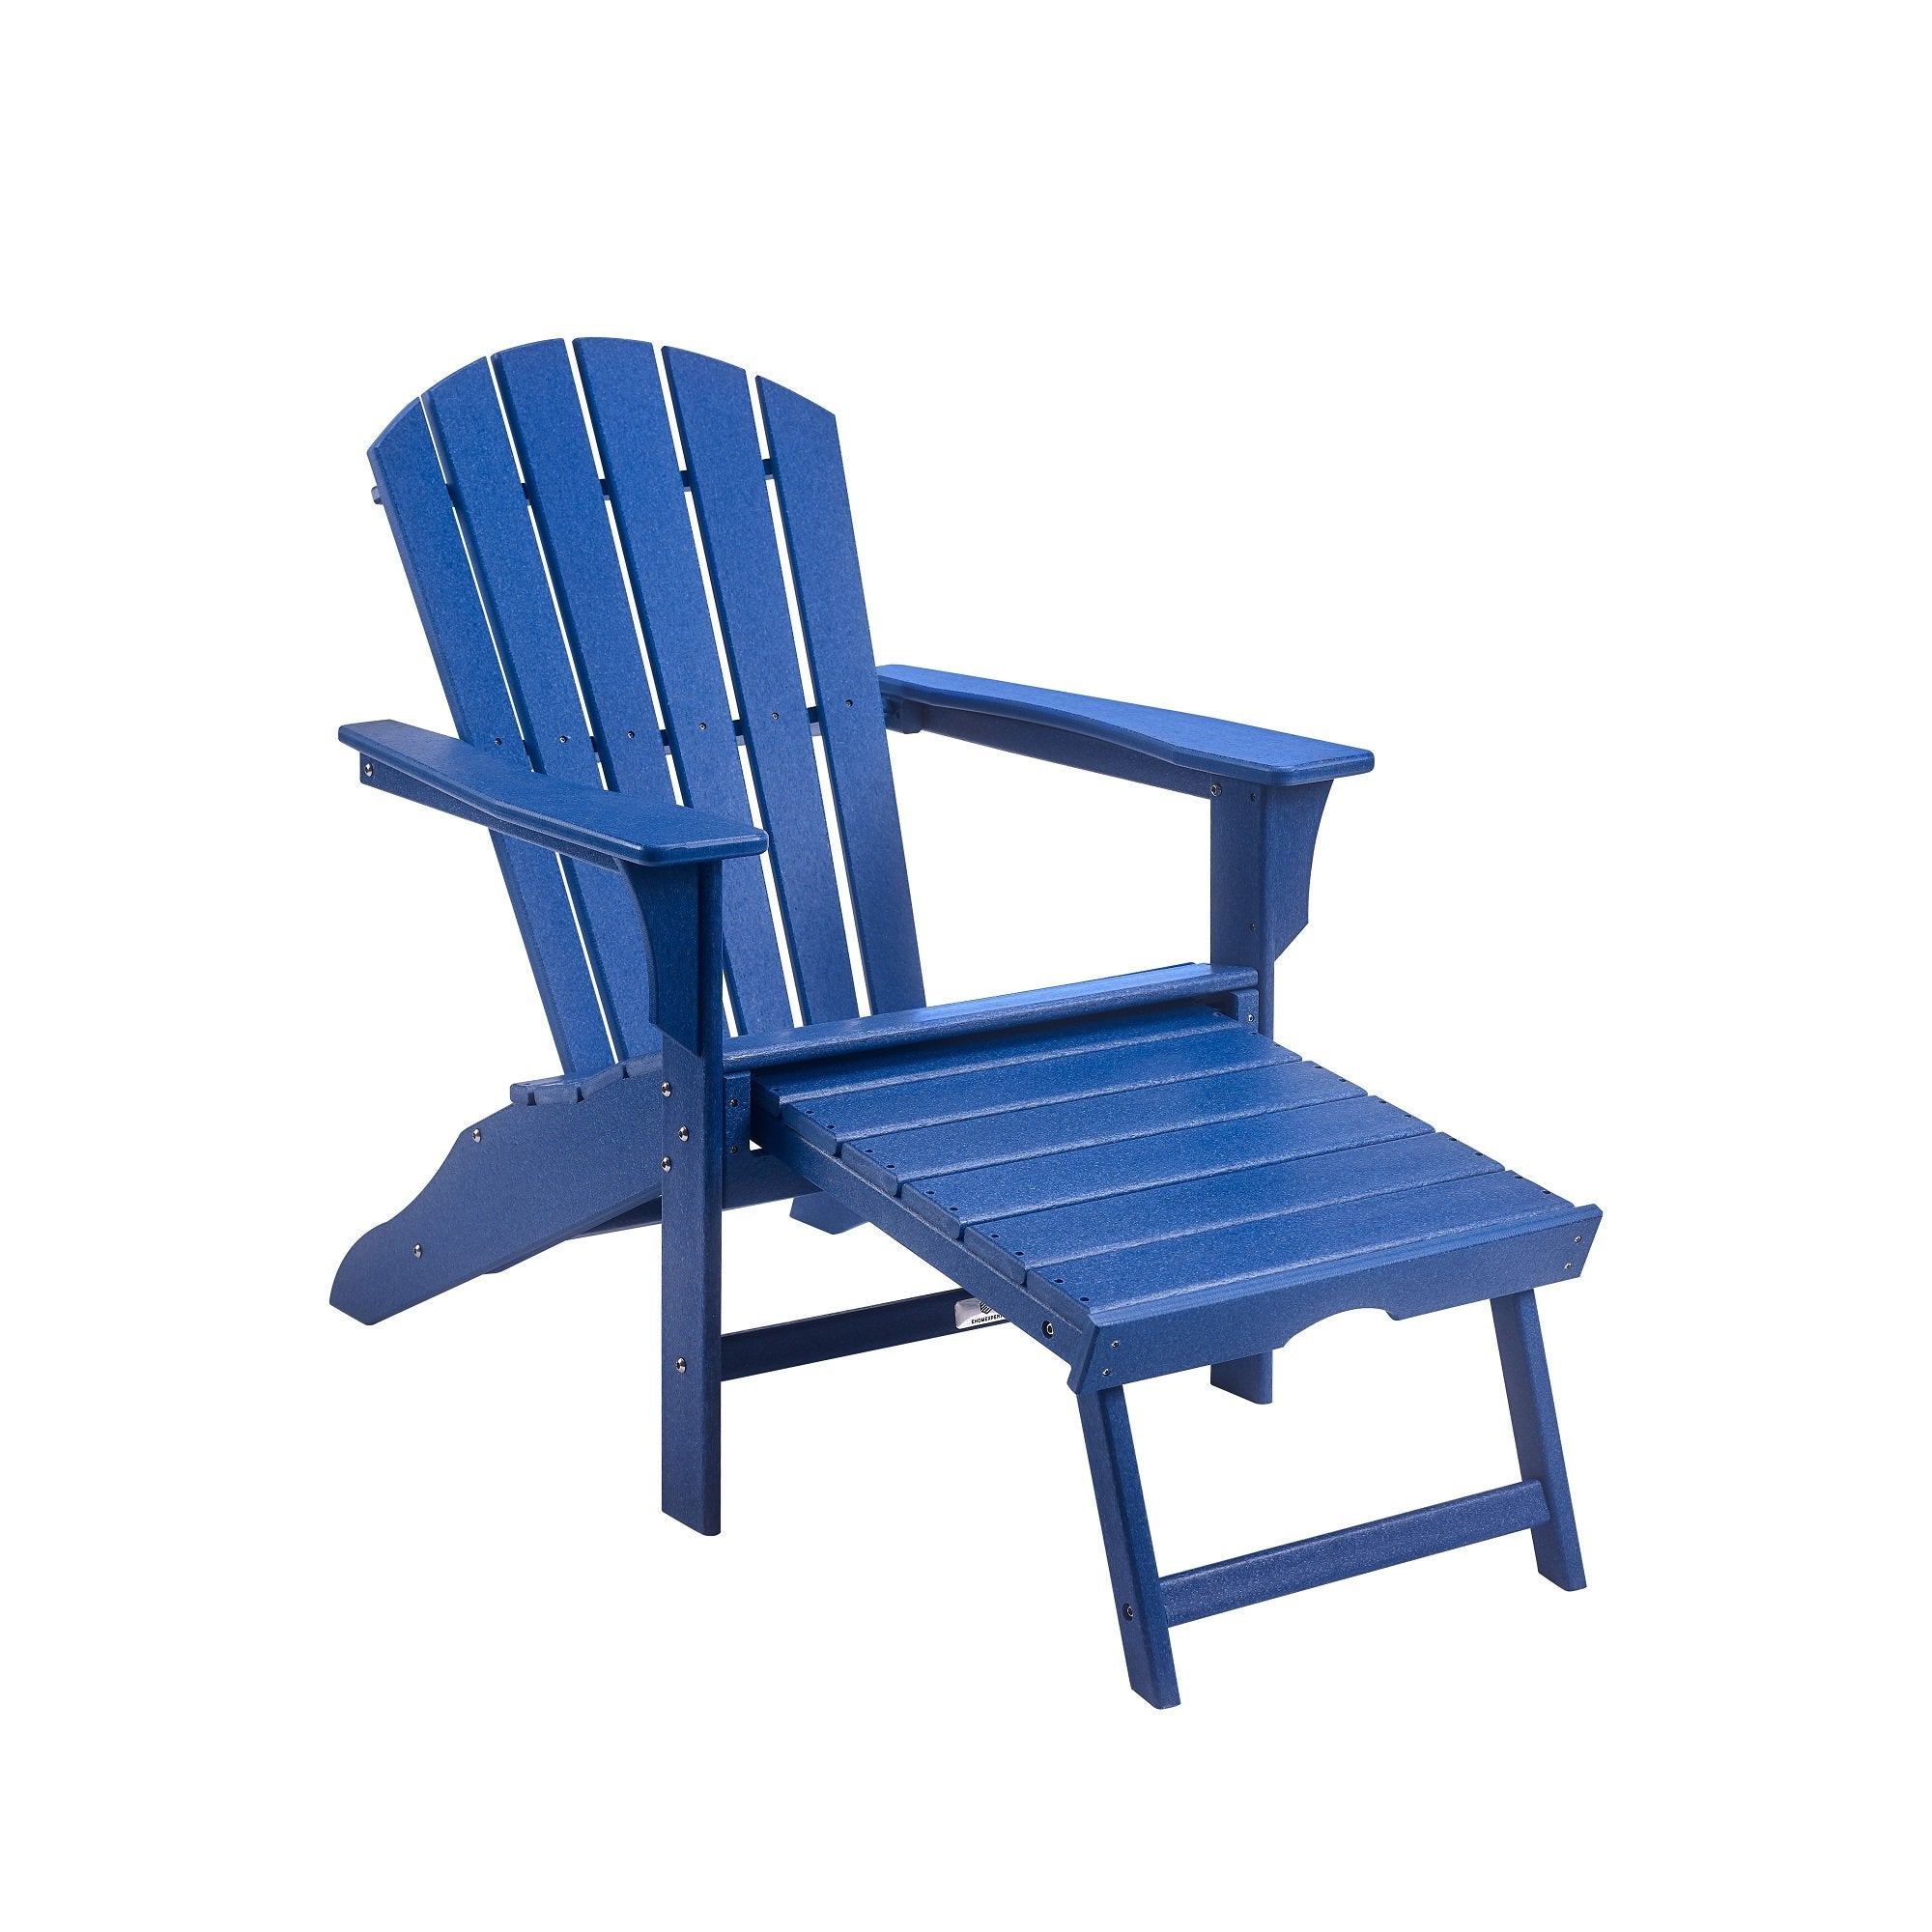 Classic Outdoor Adirondack Chair with Footrest for Garden Porch Patio Deck Backyard